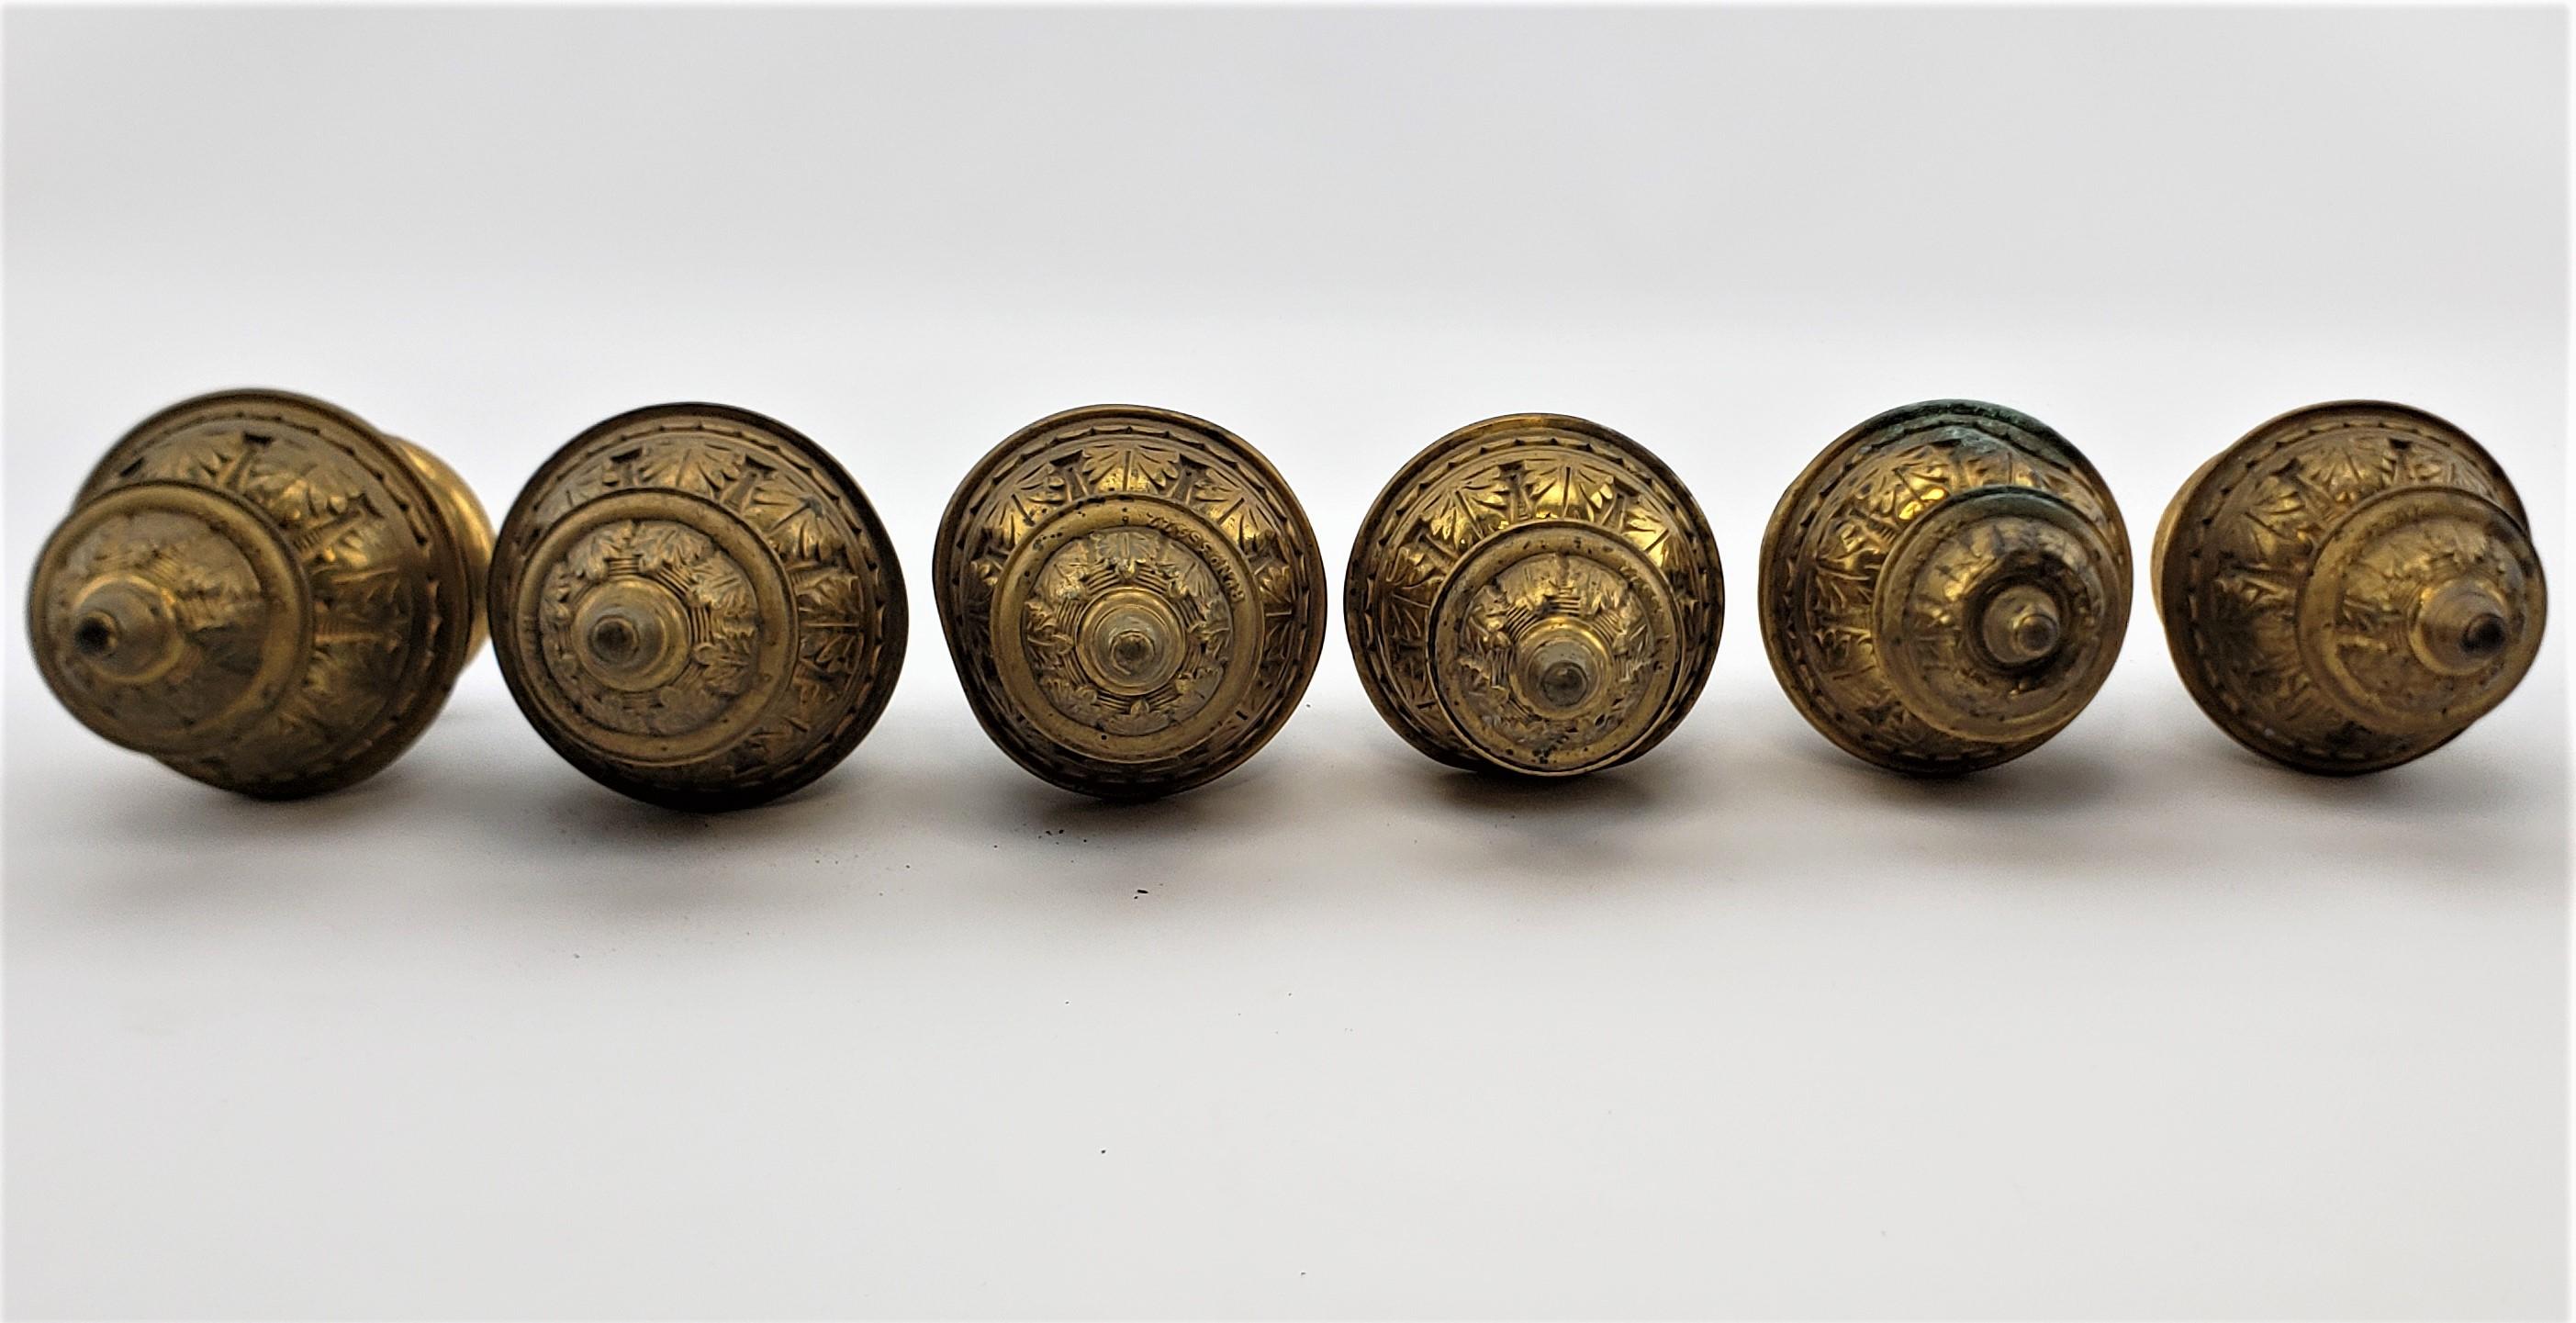 19th Century Set of 6 Salvaged Antique Brass Architectural Furniture or Curtain Rod Finials